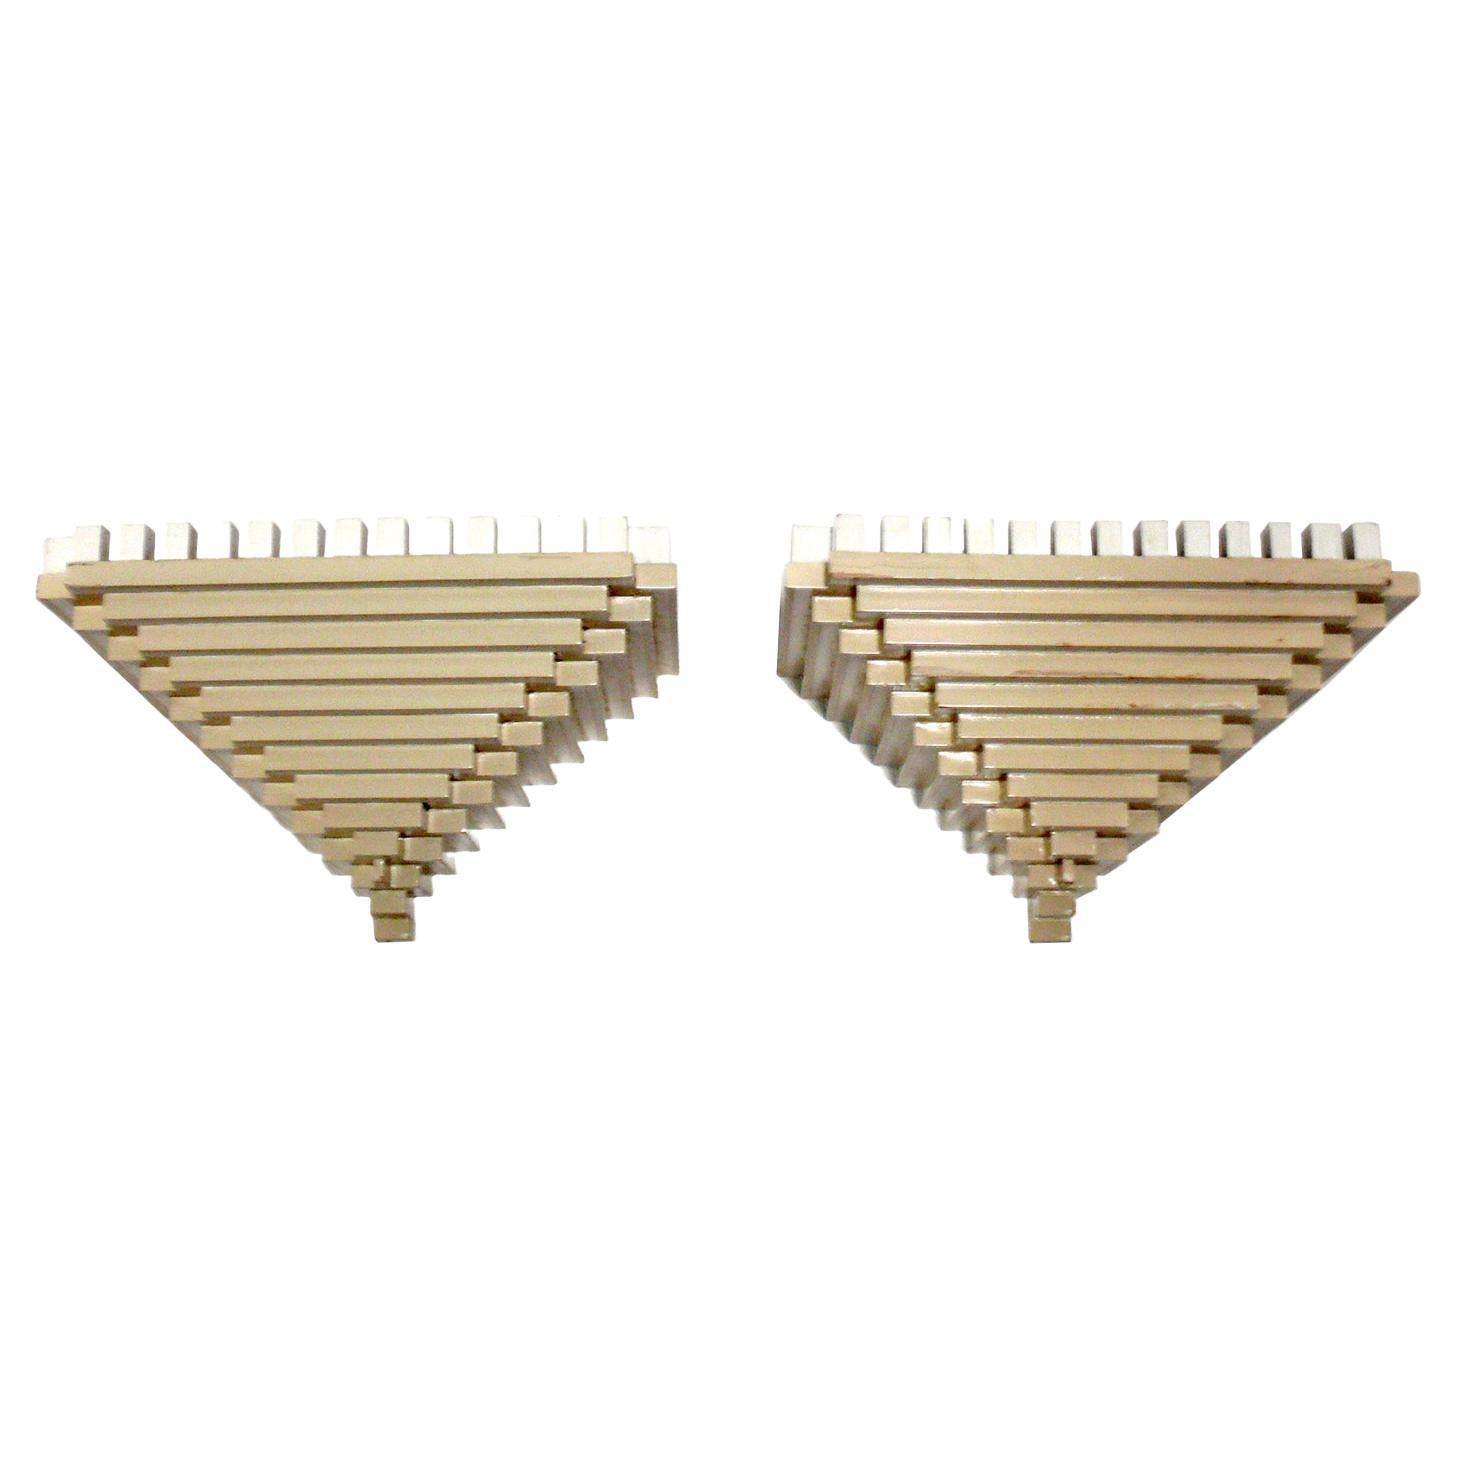 Lacquered Ziggurat Form Wall Shelves or Sconces For Sale